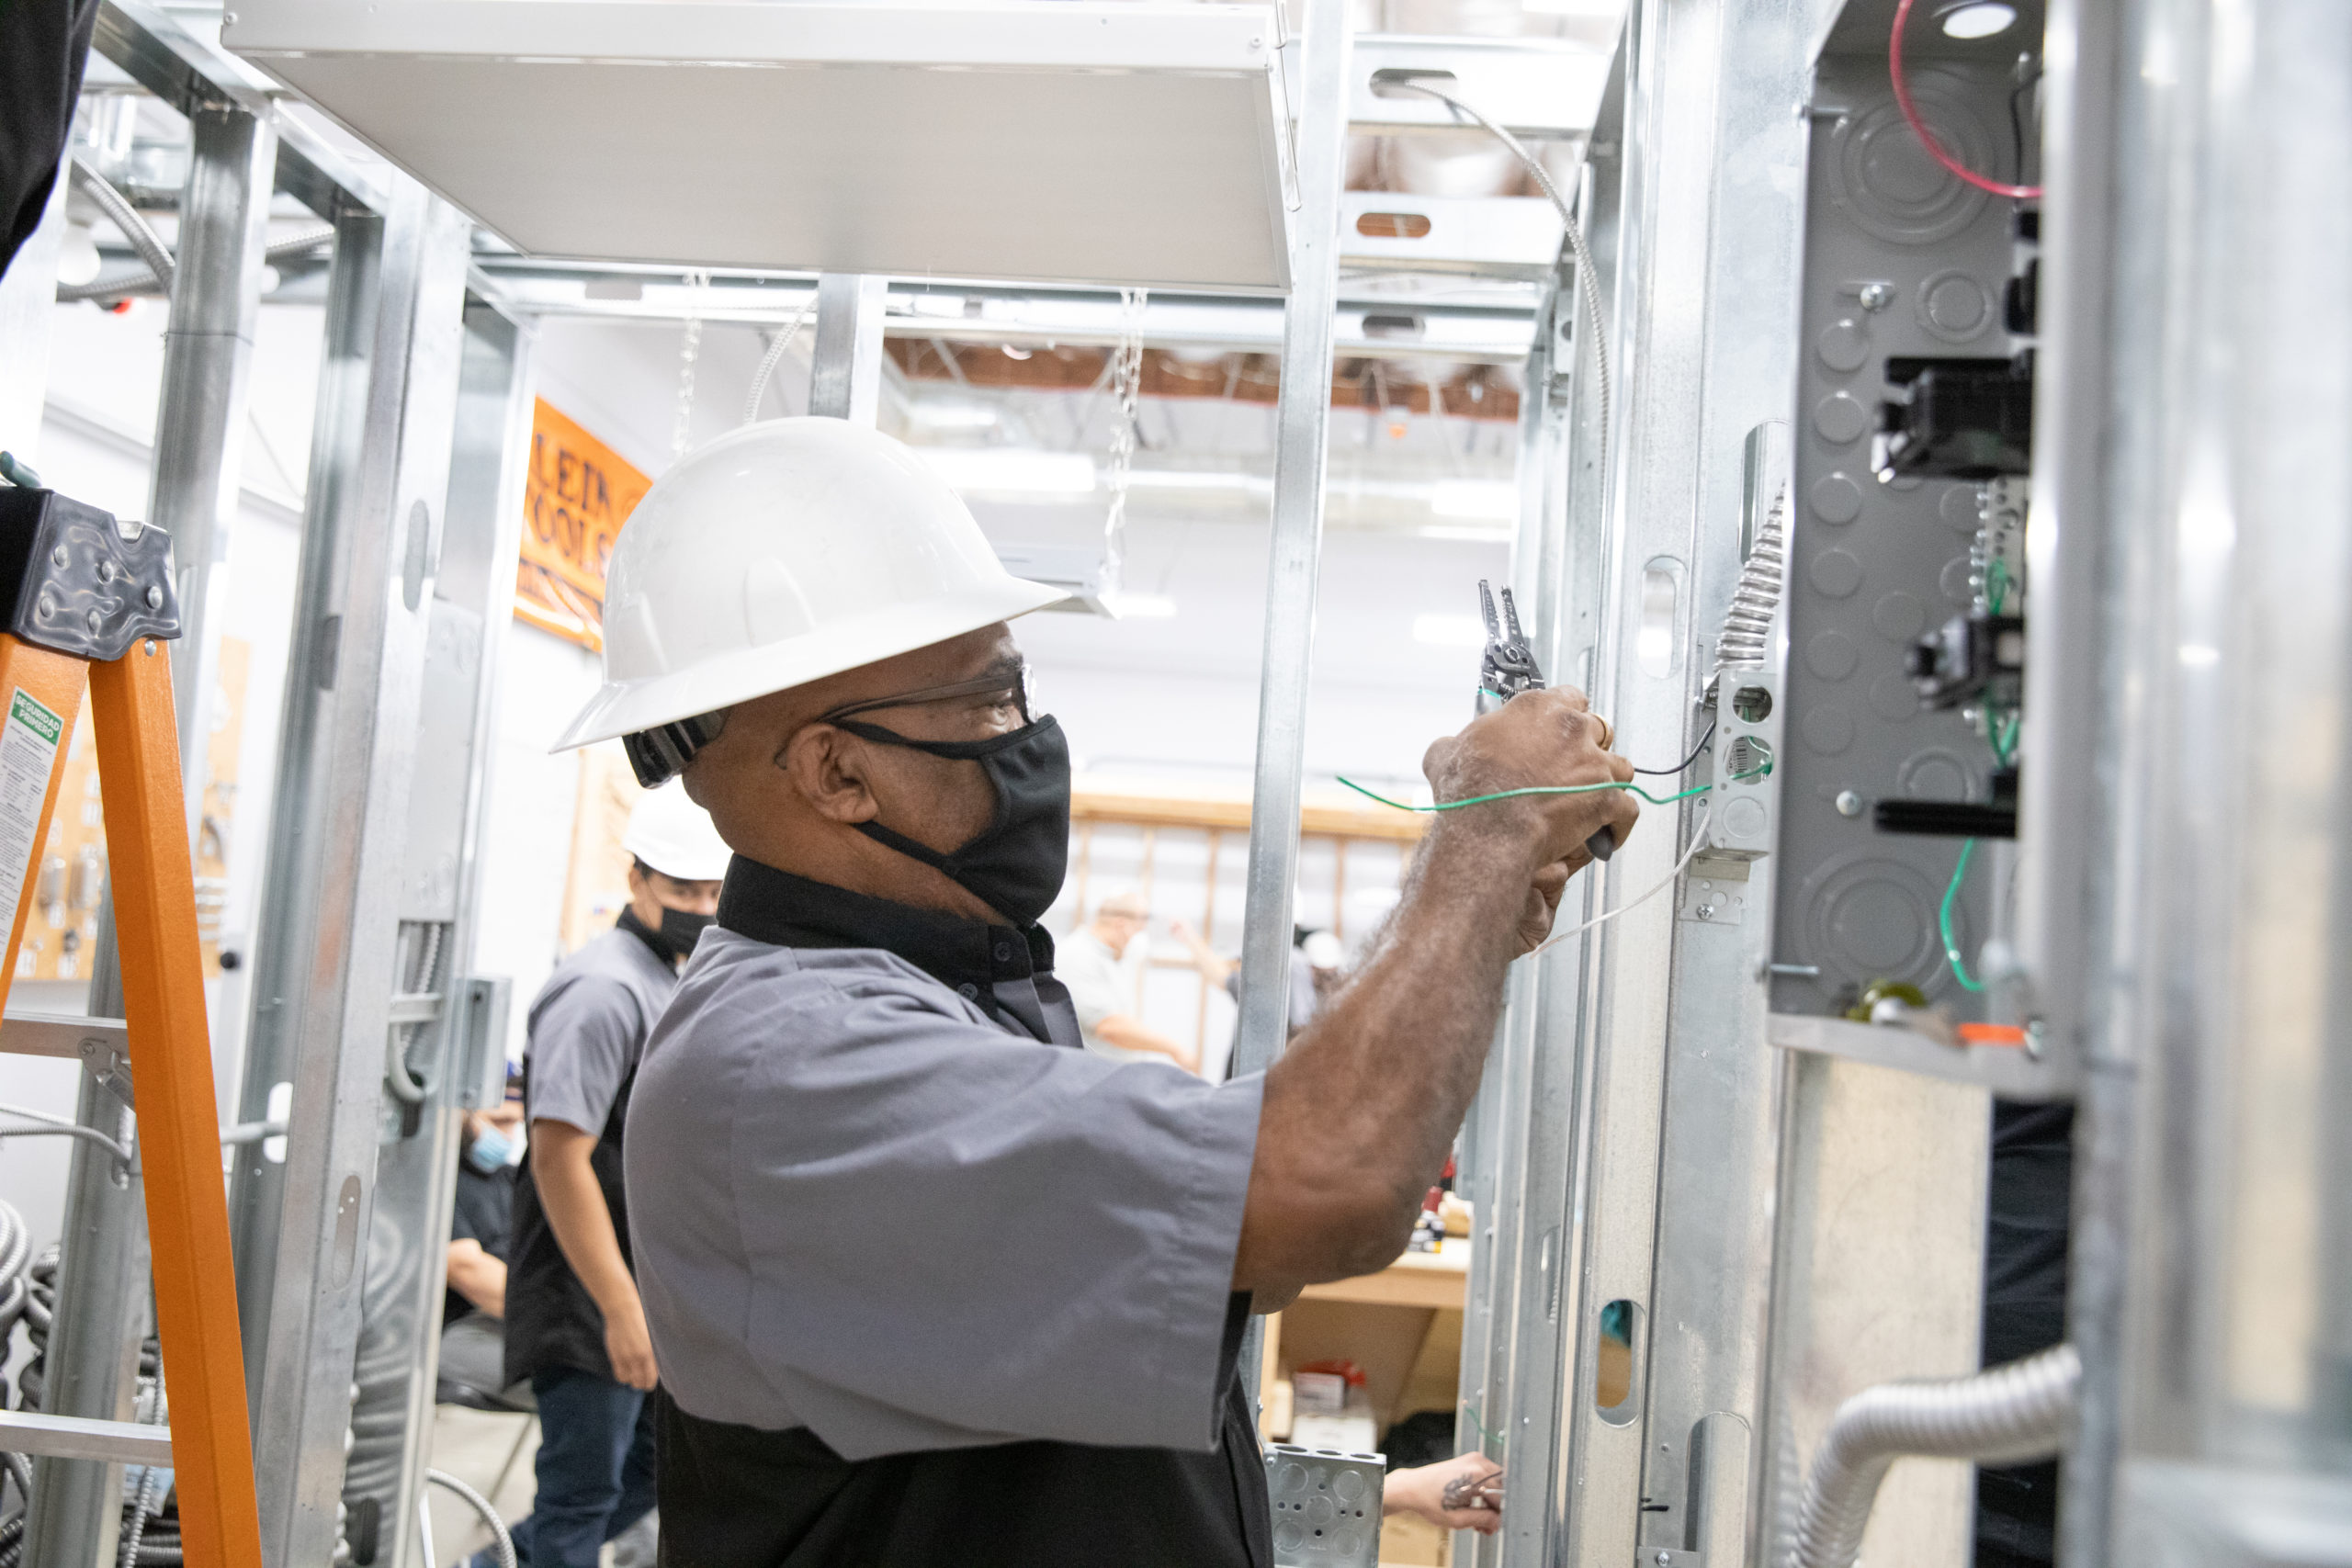 How to prepare for electrical repairs